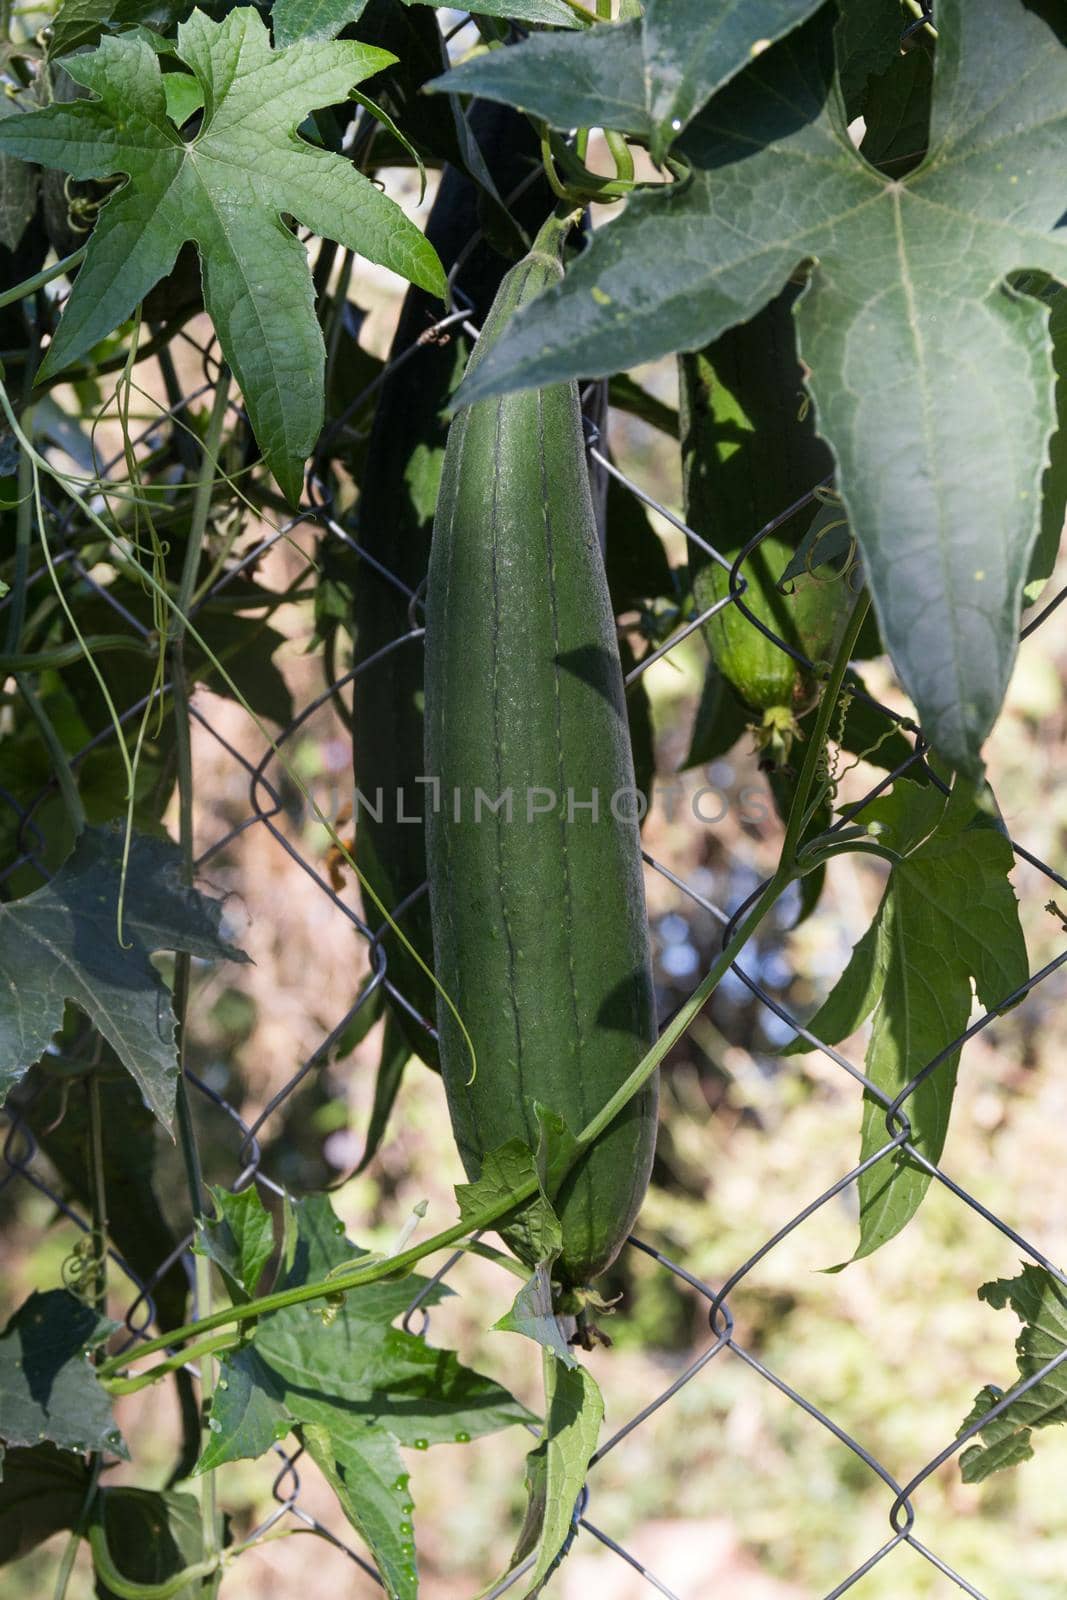 immature luffa fruits to eat in the garden fence by GabrielaBertolini